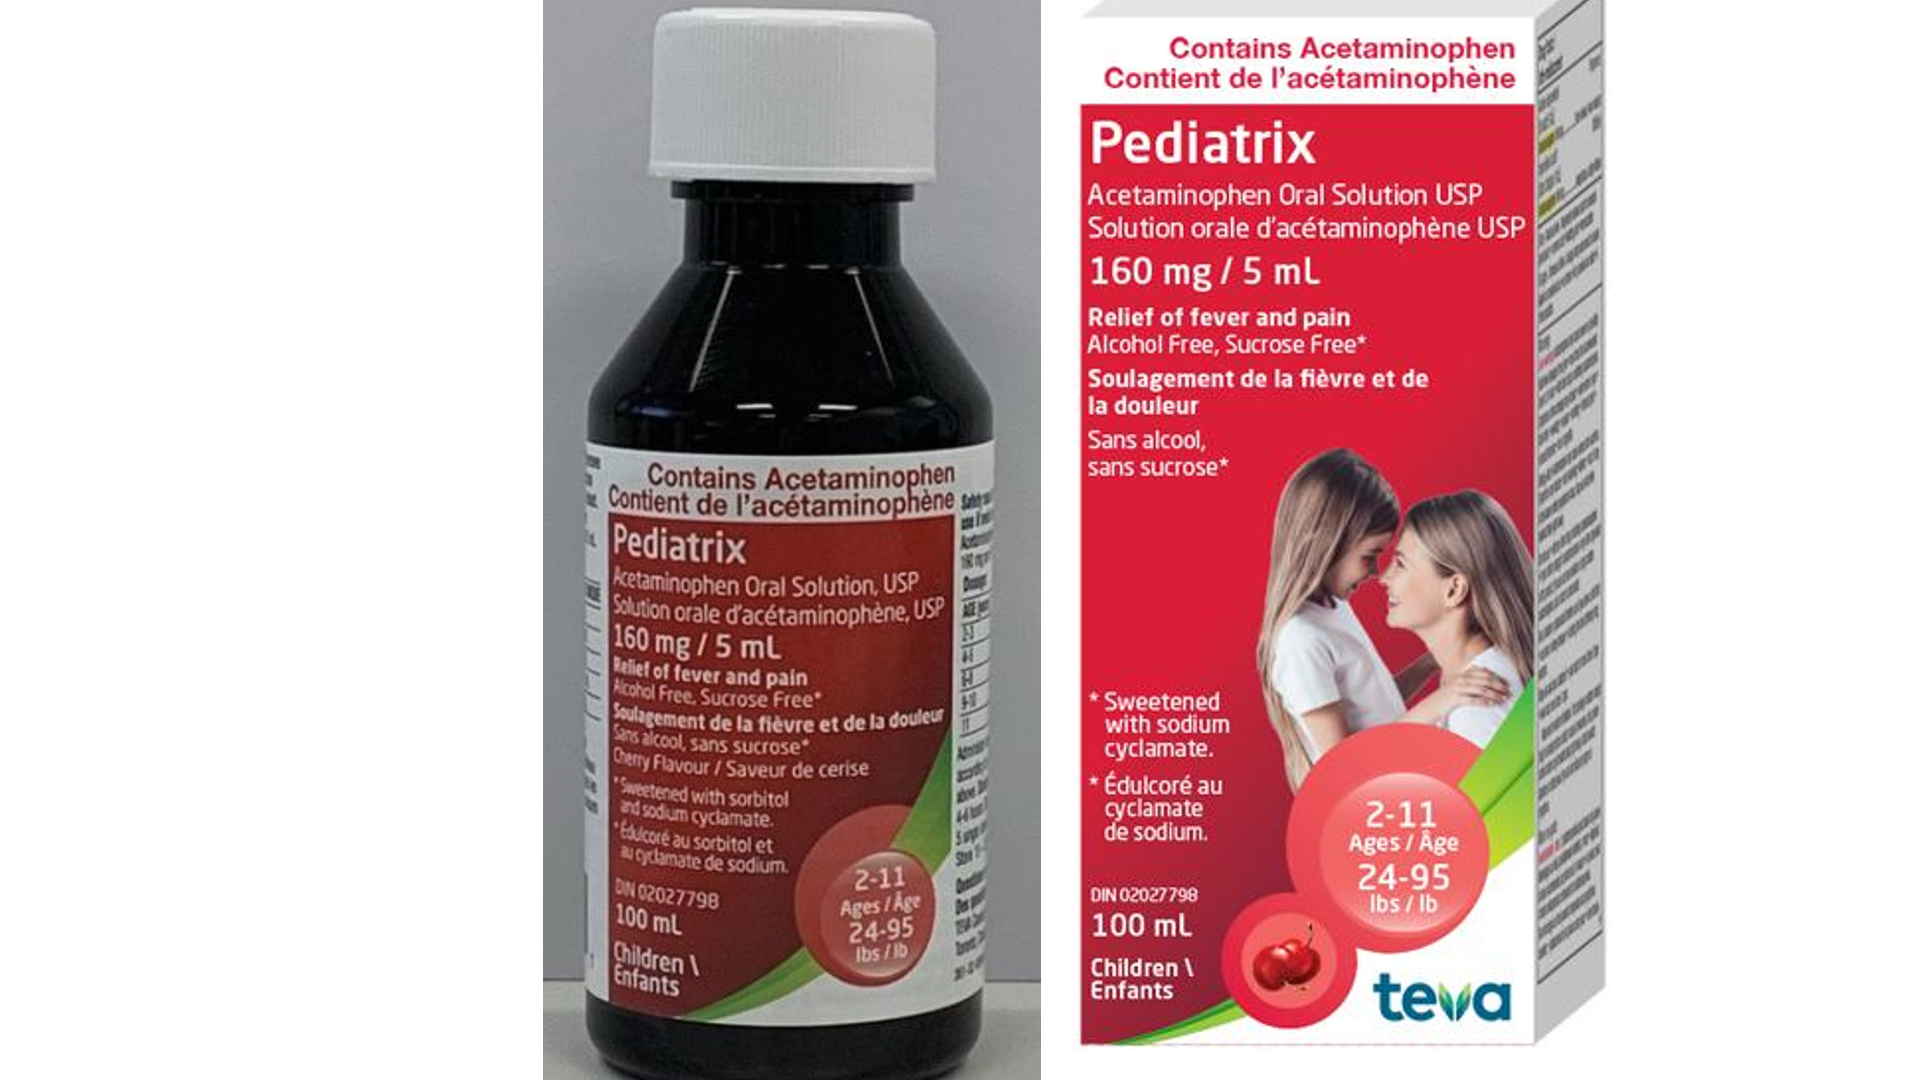 Kids pain product recalled in Canada due to potential overdose risk